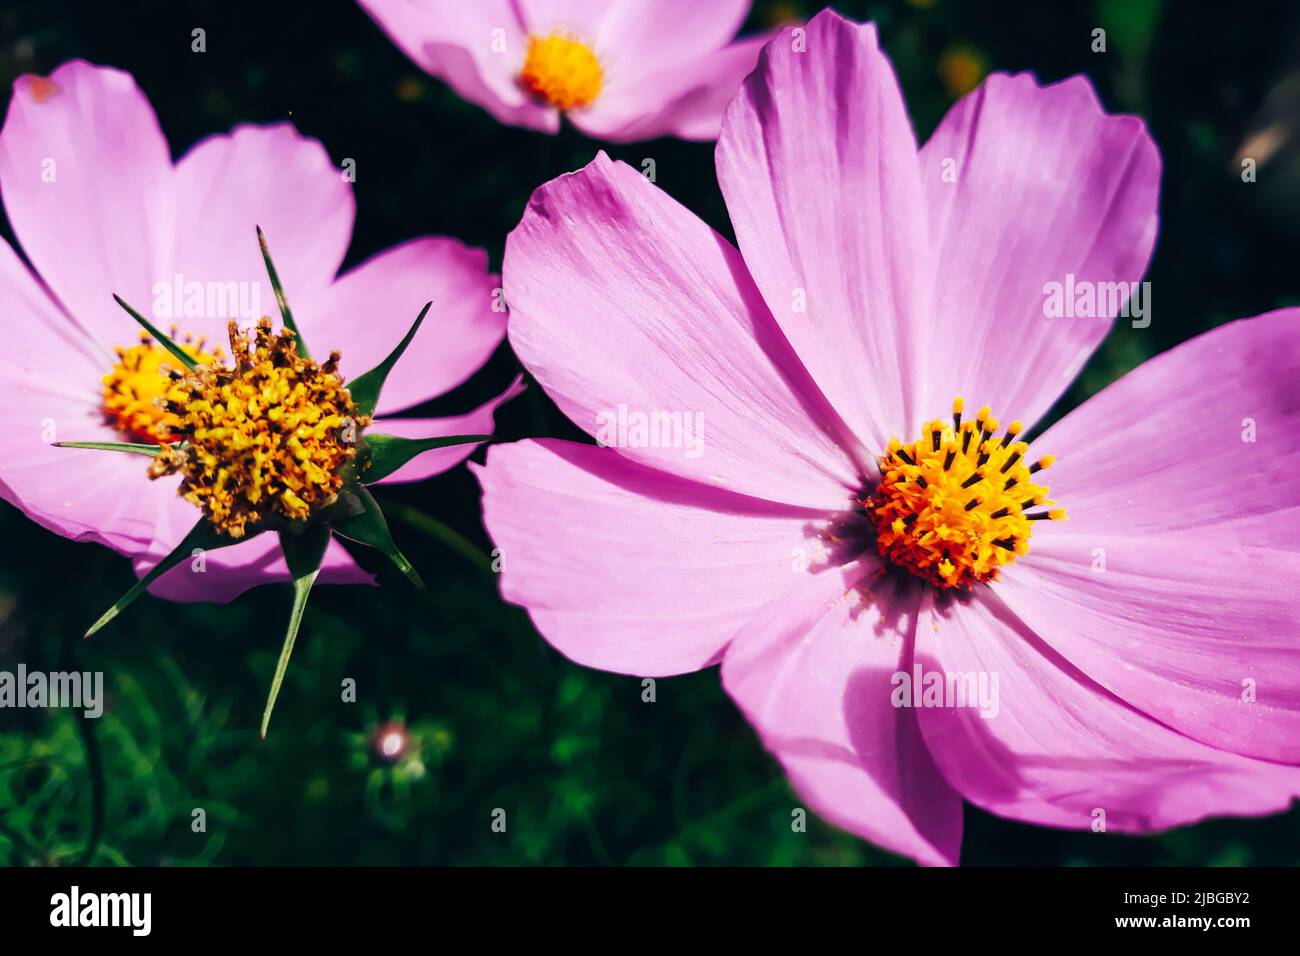 Pink flower Cosmea or Cosmos bipinnatus close-up. Growing plants in the home garden. Summer background. Stock Photo